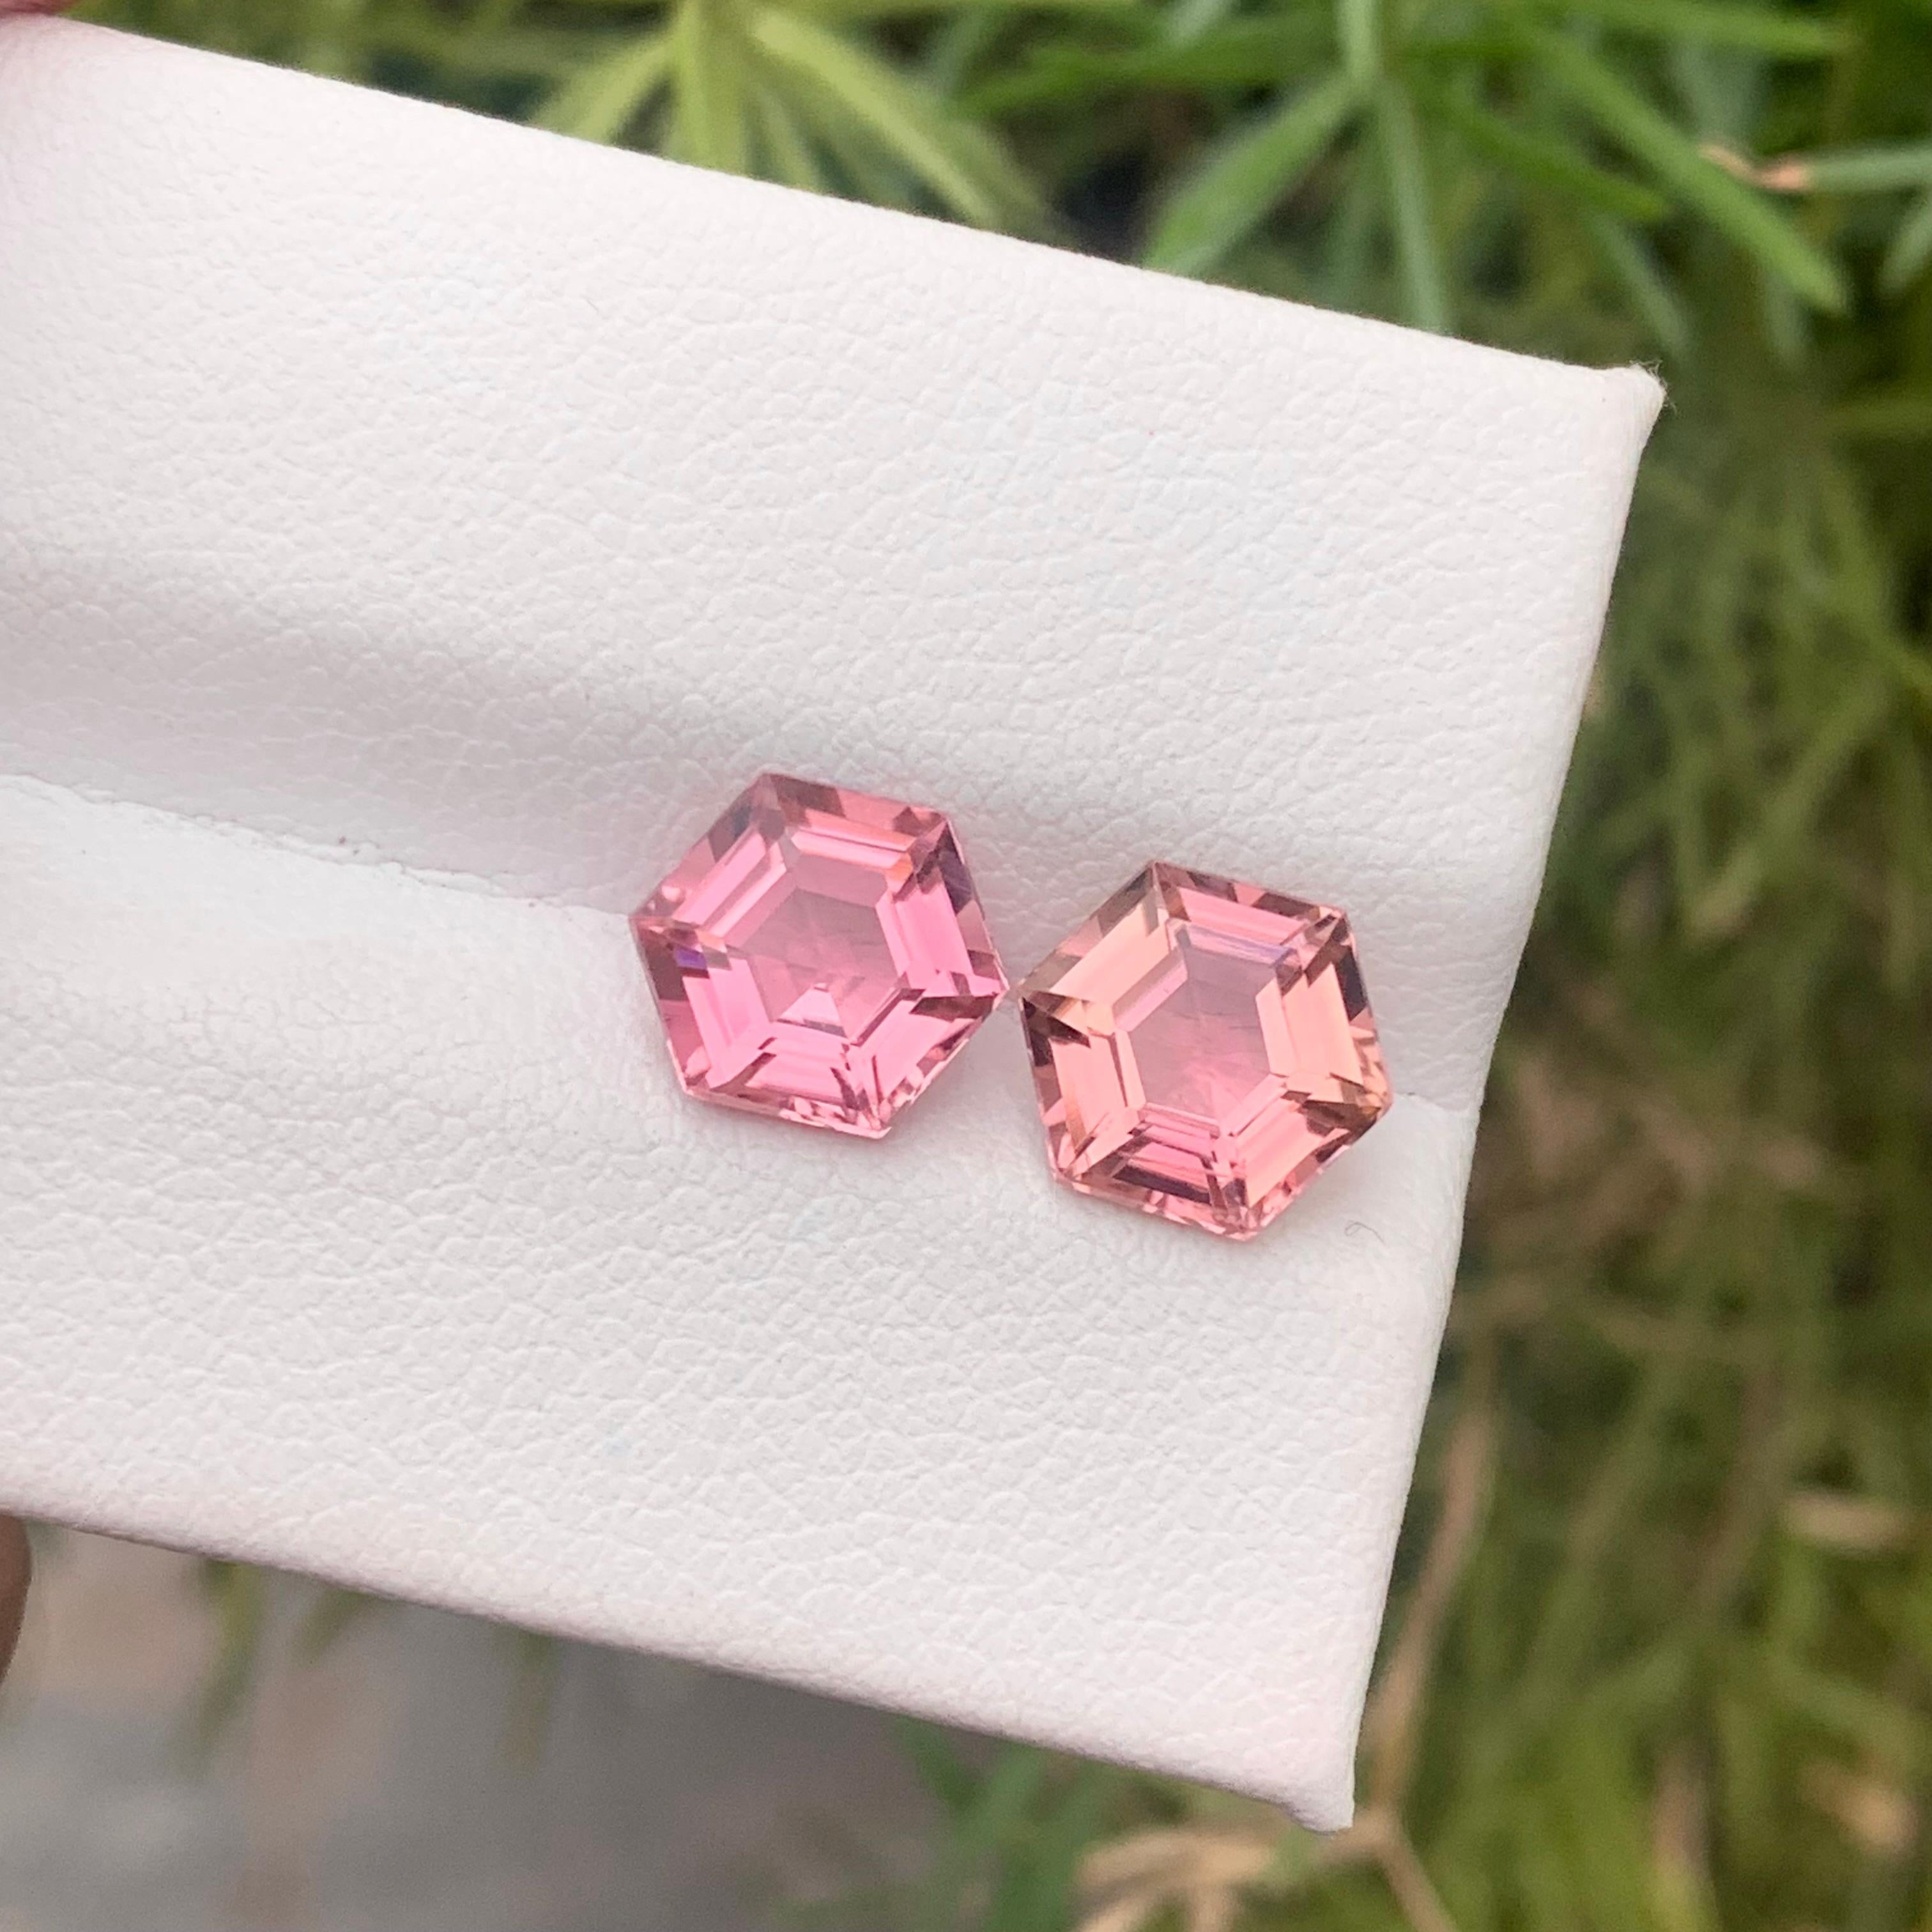 Faceted Tourmaline
Weight: 3.90 Carats
Dimension: 7.9x7.8x4.9 Mm
Origin: Kunar Afghanistan
Color: Pink
Shape: Hexagon
Clarity: Eye Clean
Certificate: On Demand

With a rating between 7 and 7.5 on the Mohs scale of mineral hardness, tourmaline